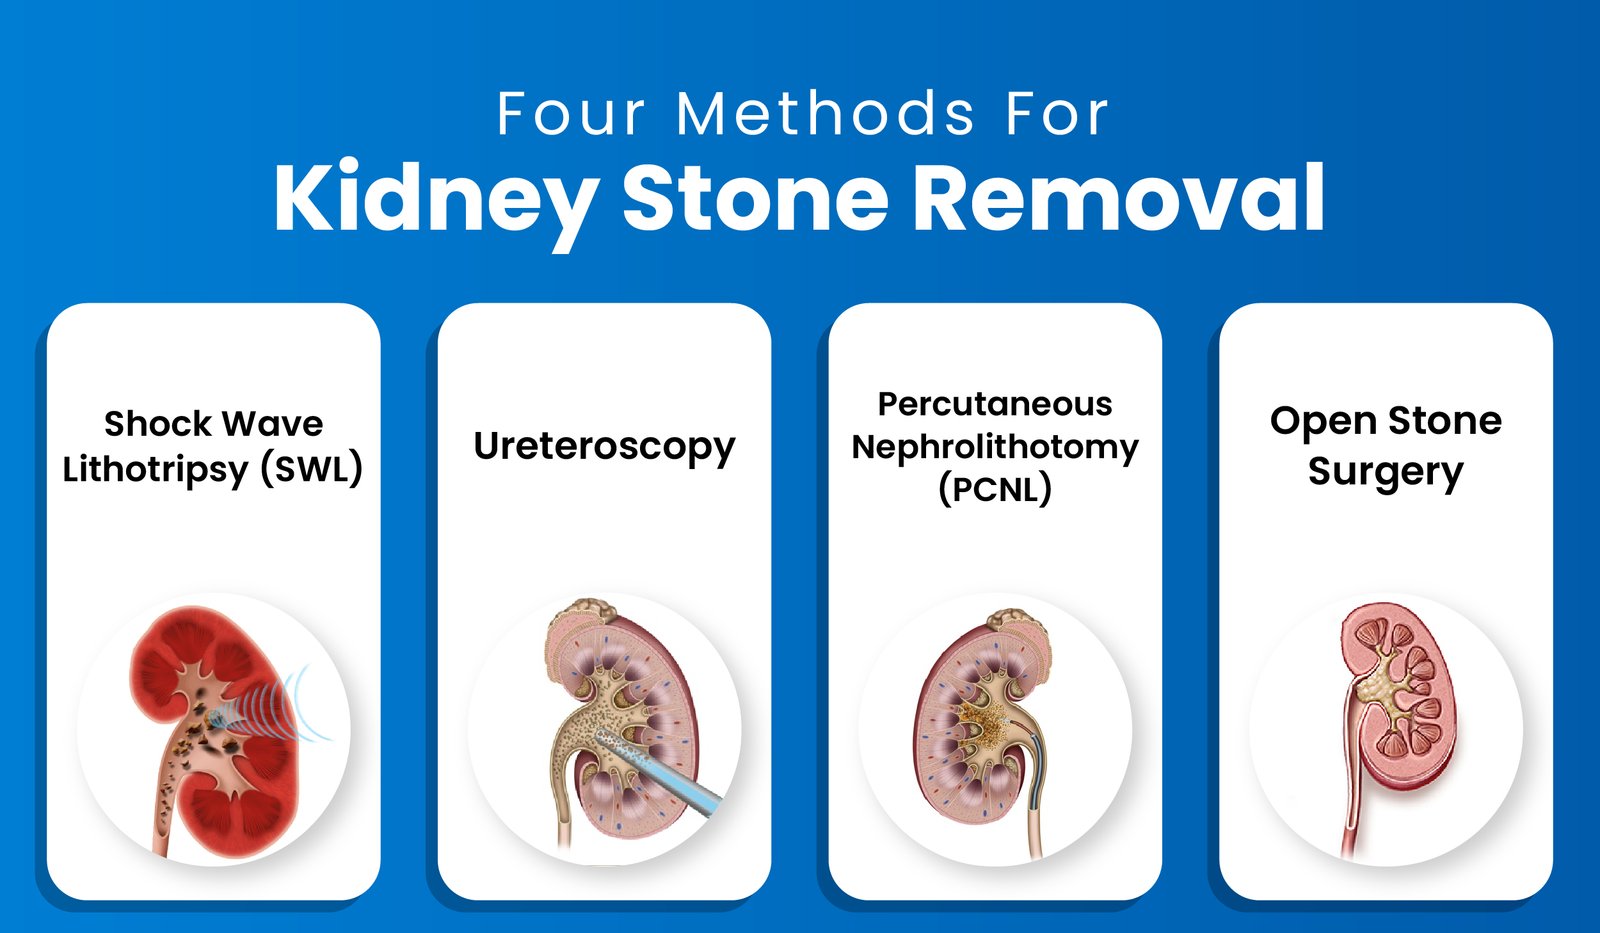 Four Methods for Kidney Stone Removal